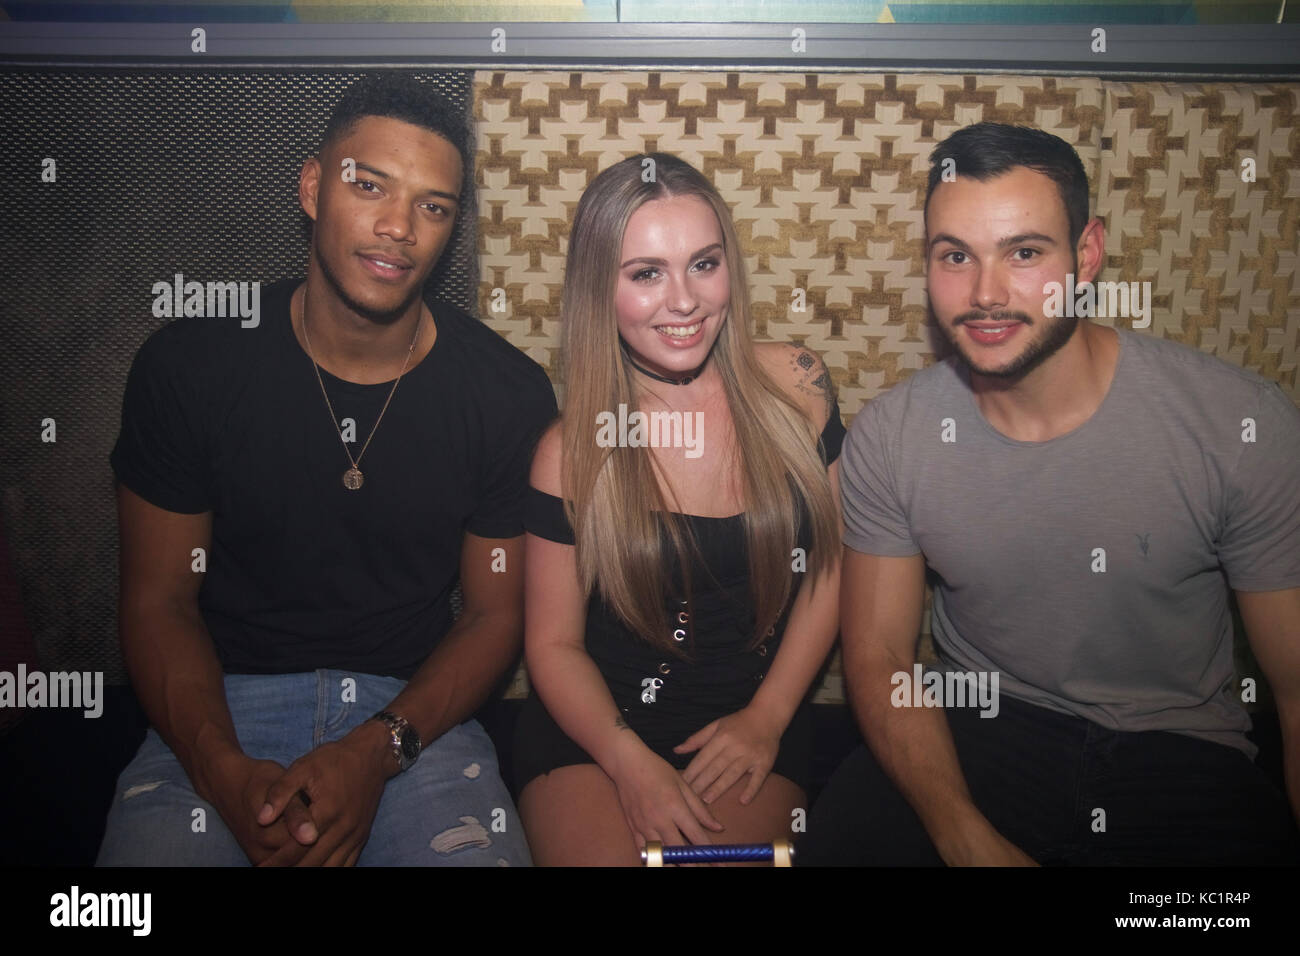 Theo Campbell of Love Island 2017 at Geo Bar Eastcote UK. Theo was billed to appear alongside rival Jonny Mitchell who did not turn up. He kept up their ongoing feud saying 'Well he is probably busy with Stephanie Pratt now isn't he. Even though that will be over in five months. Some people will do anything to stay relevant.' Theo joked over the mic to fans 'fuck Jonny anyway right?' as everyone cheered. He offered out drinks as he and friend Charlie Babb leaving to go back to their hotel in time for their 5am flight to Ibiza. Theo tried his hand at DJ'ing and was mobbed at the booth by girls. Stock Photo